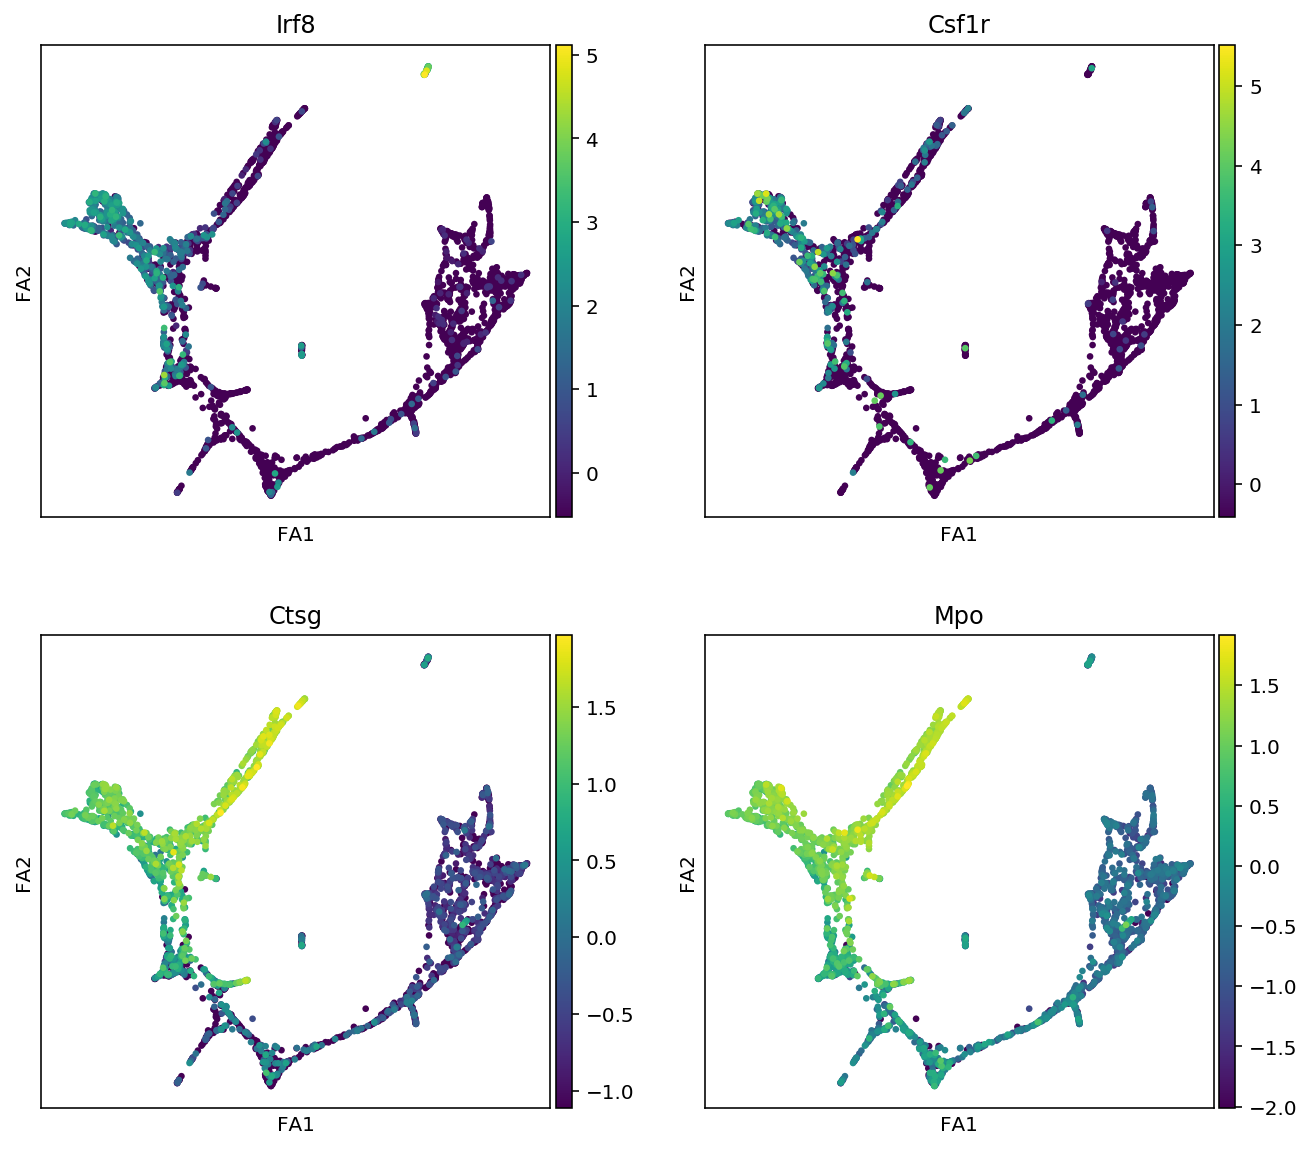 ../../_images/notebooks_03_scRNA-seq_data_preprocessing_scanpy_preprocessing_with_Paul_etal_2015_data_26_3.png